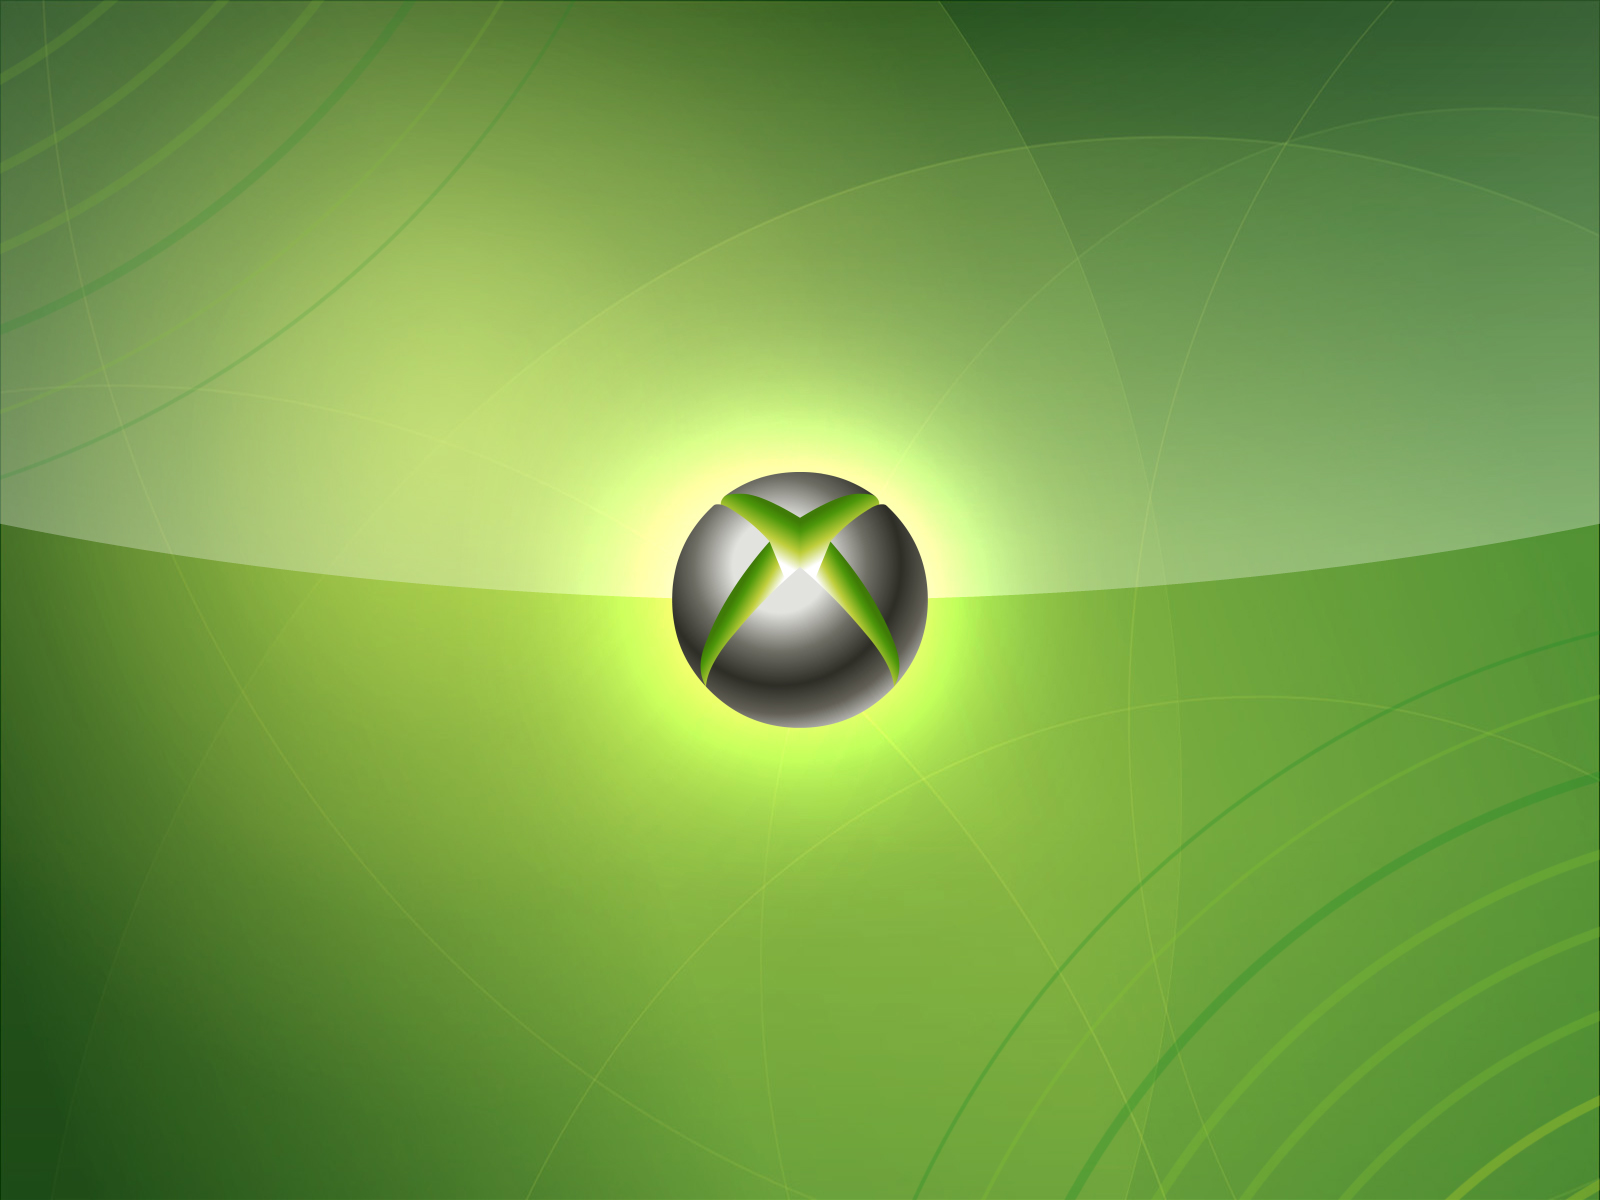 Free Xbox 360 Wallpapers